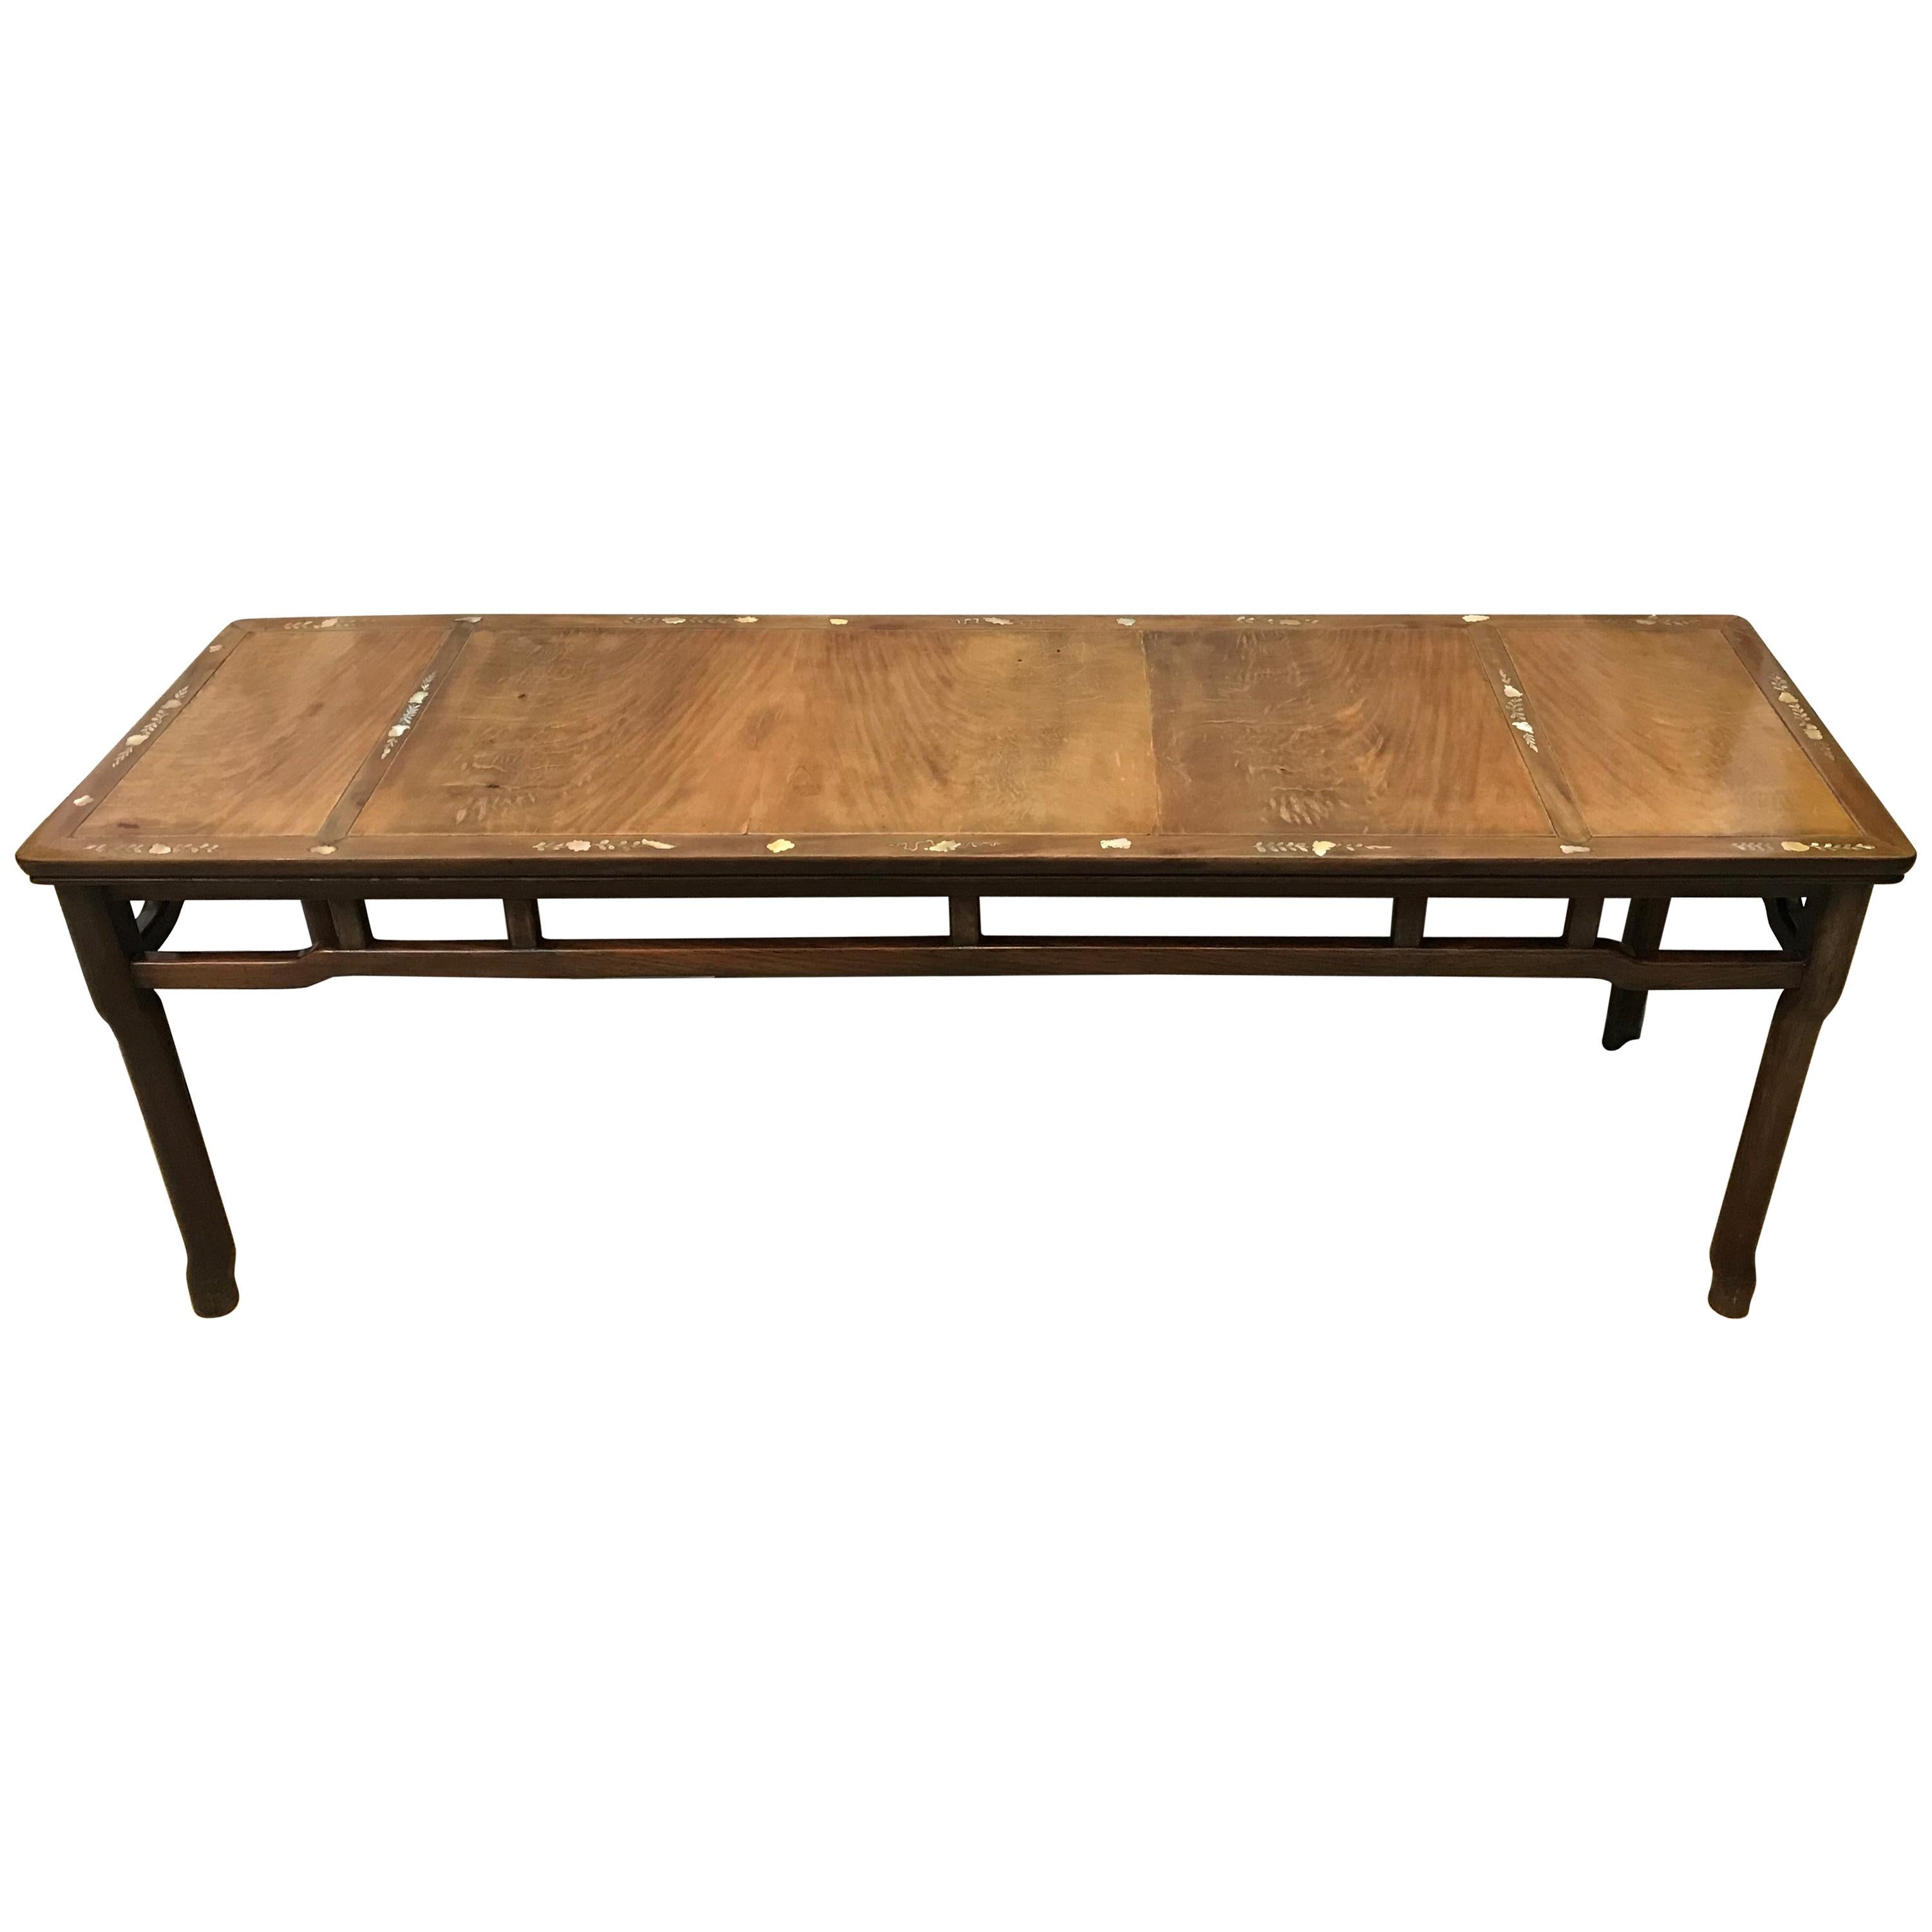 Chinese Republic Low Rectangular Table, Hardwood Inlaid with Mother of Pearl For Sale